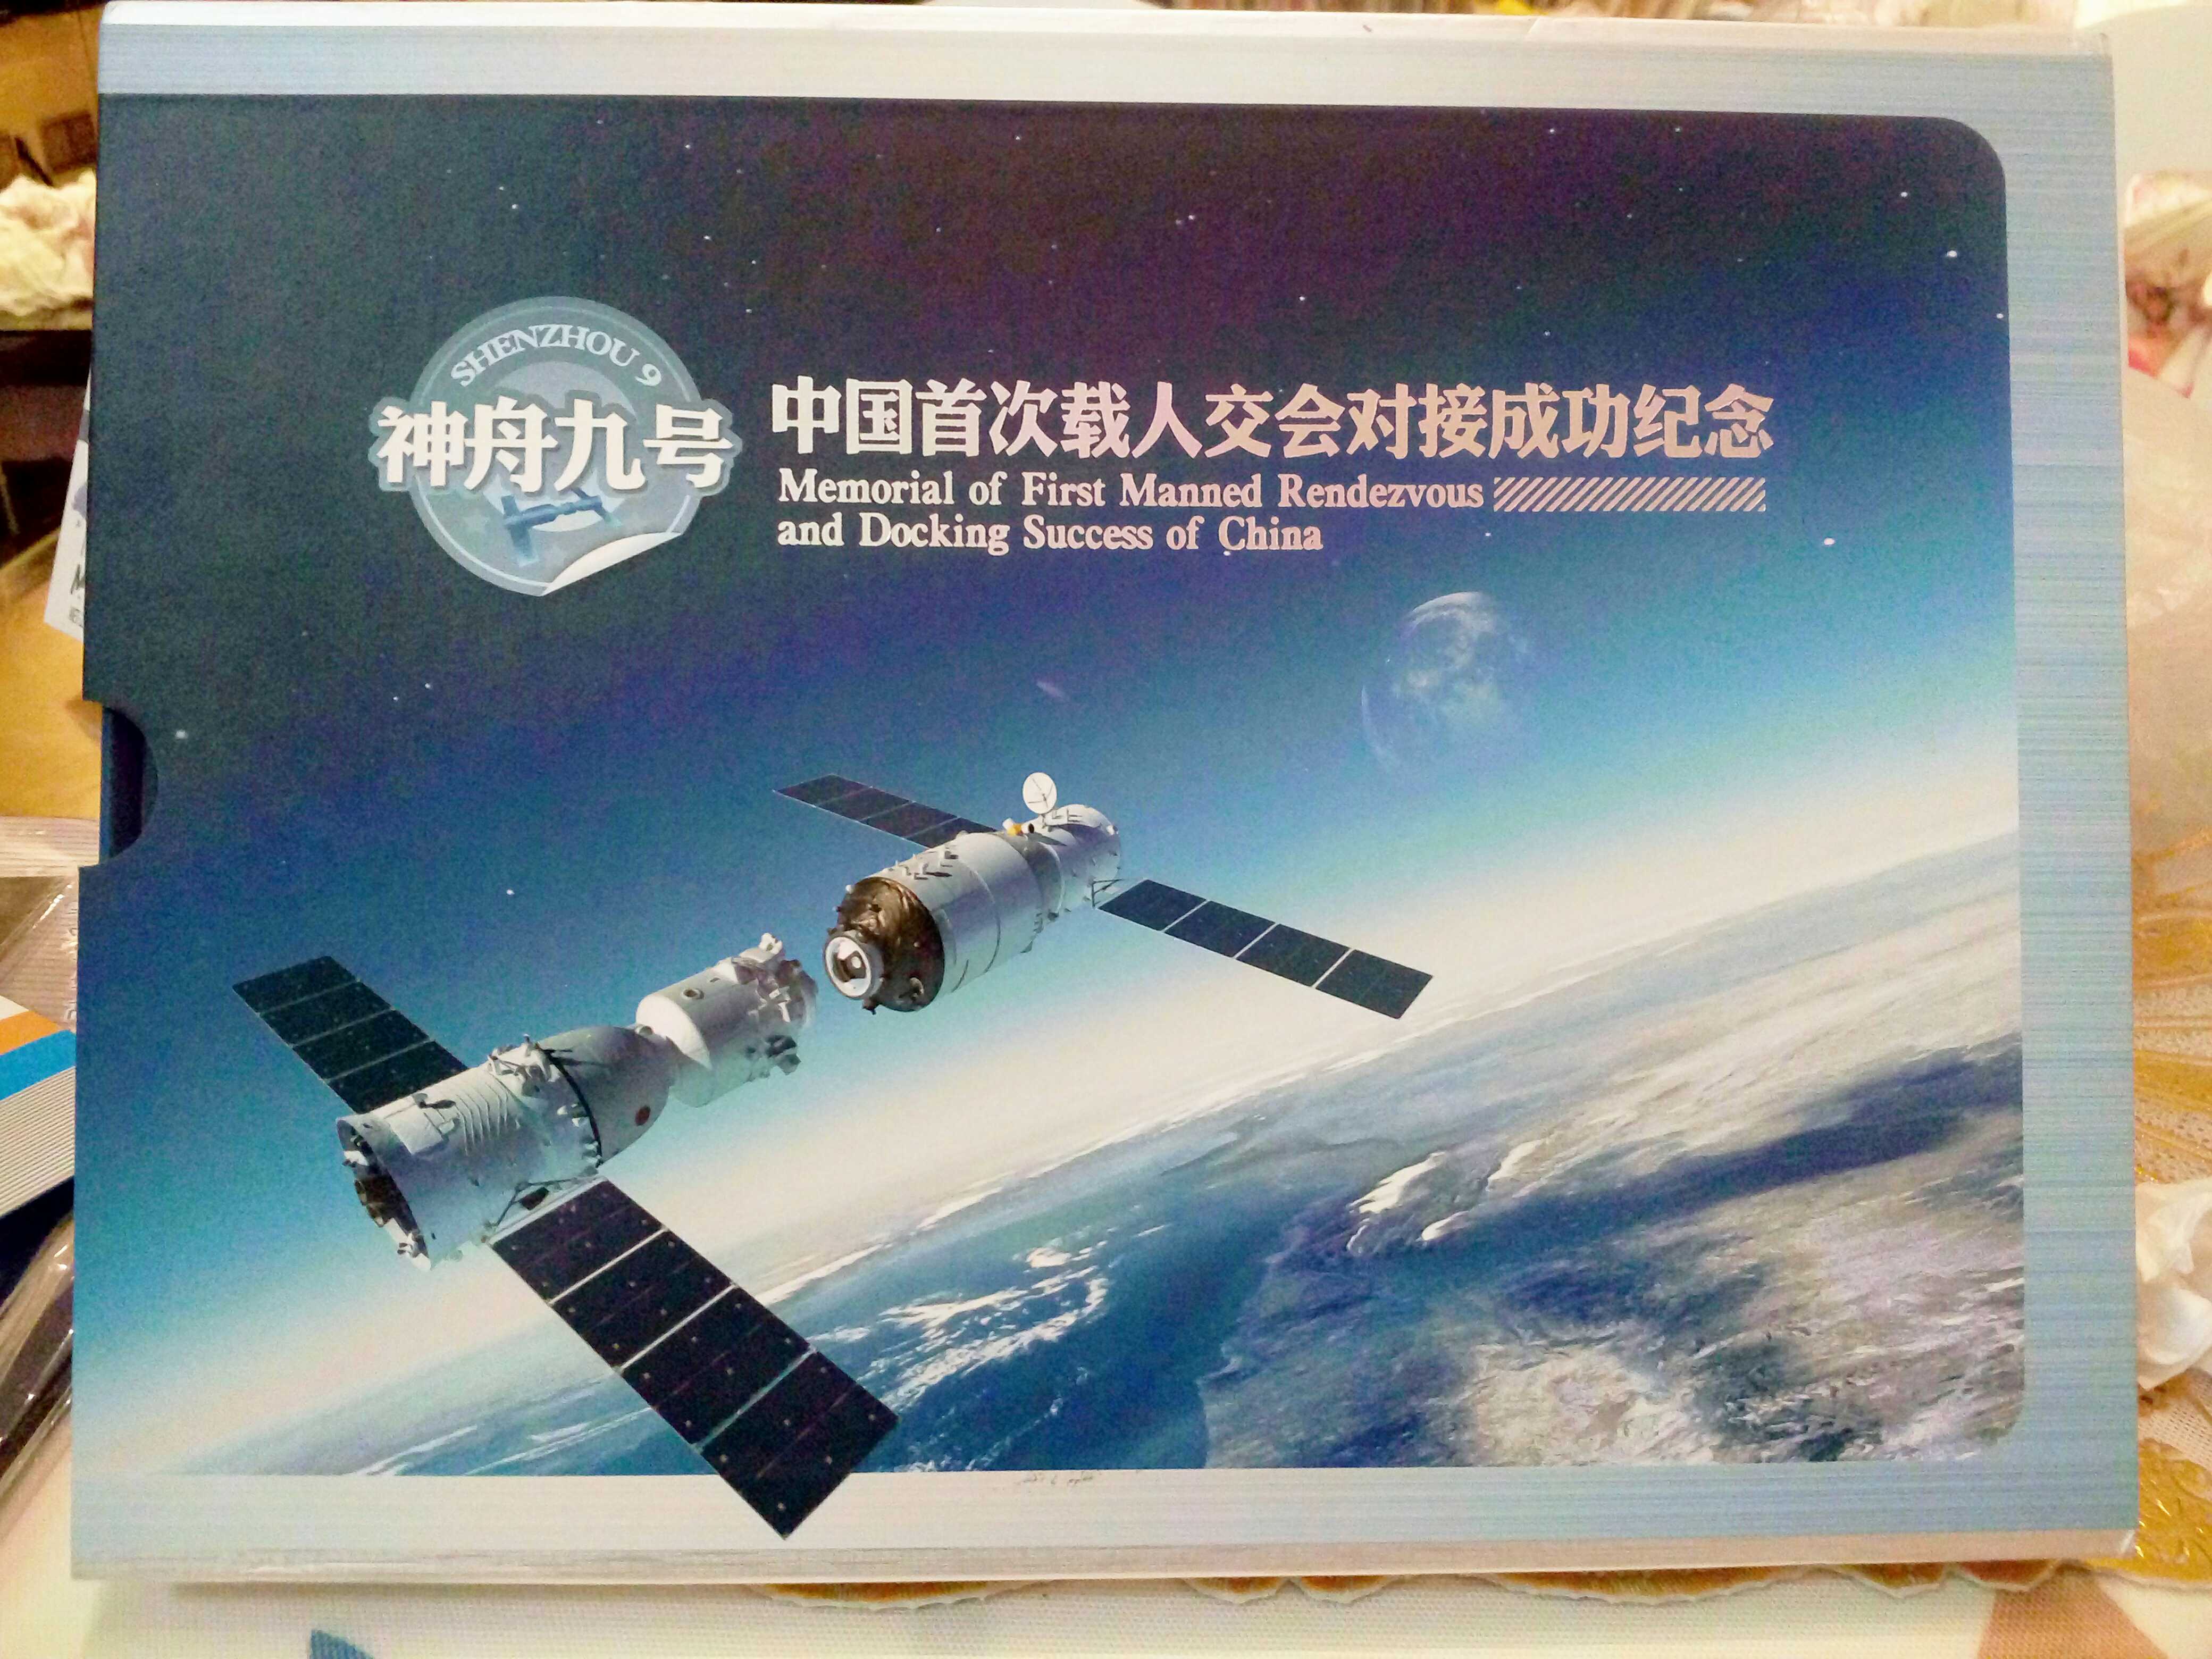 Chinas first successful manned rendezvous and docking